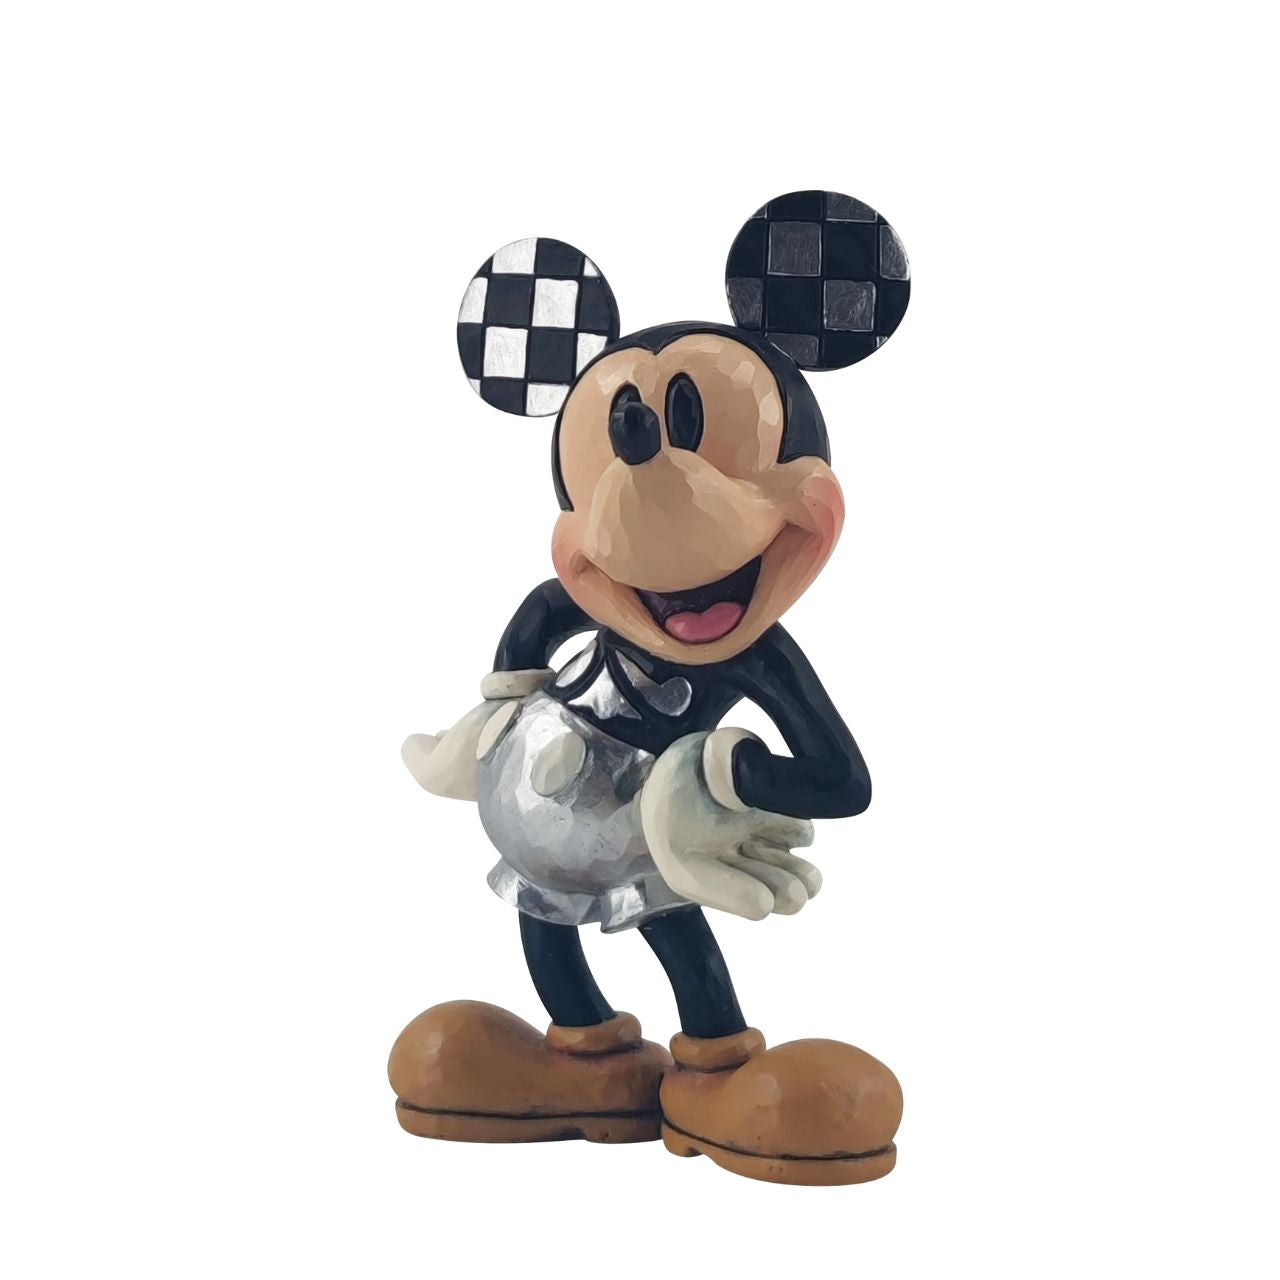 Disney 100 Years of Mickey Mouse Figurine by Jim Shore  Introducing the Disney 100 Mickey Mouse Figurine, a must-have for any Disney fan and collector. This exquisite figurine features the iconic Mickey Mouse in his classic pose, with a big grin and hands on his hips. Crafted with exceptional attention to detail, this figurine is made from high-quality cast stone, ensuring durability and longevity.